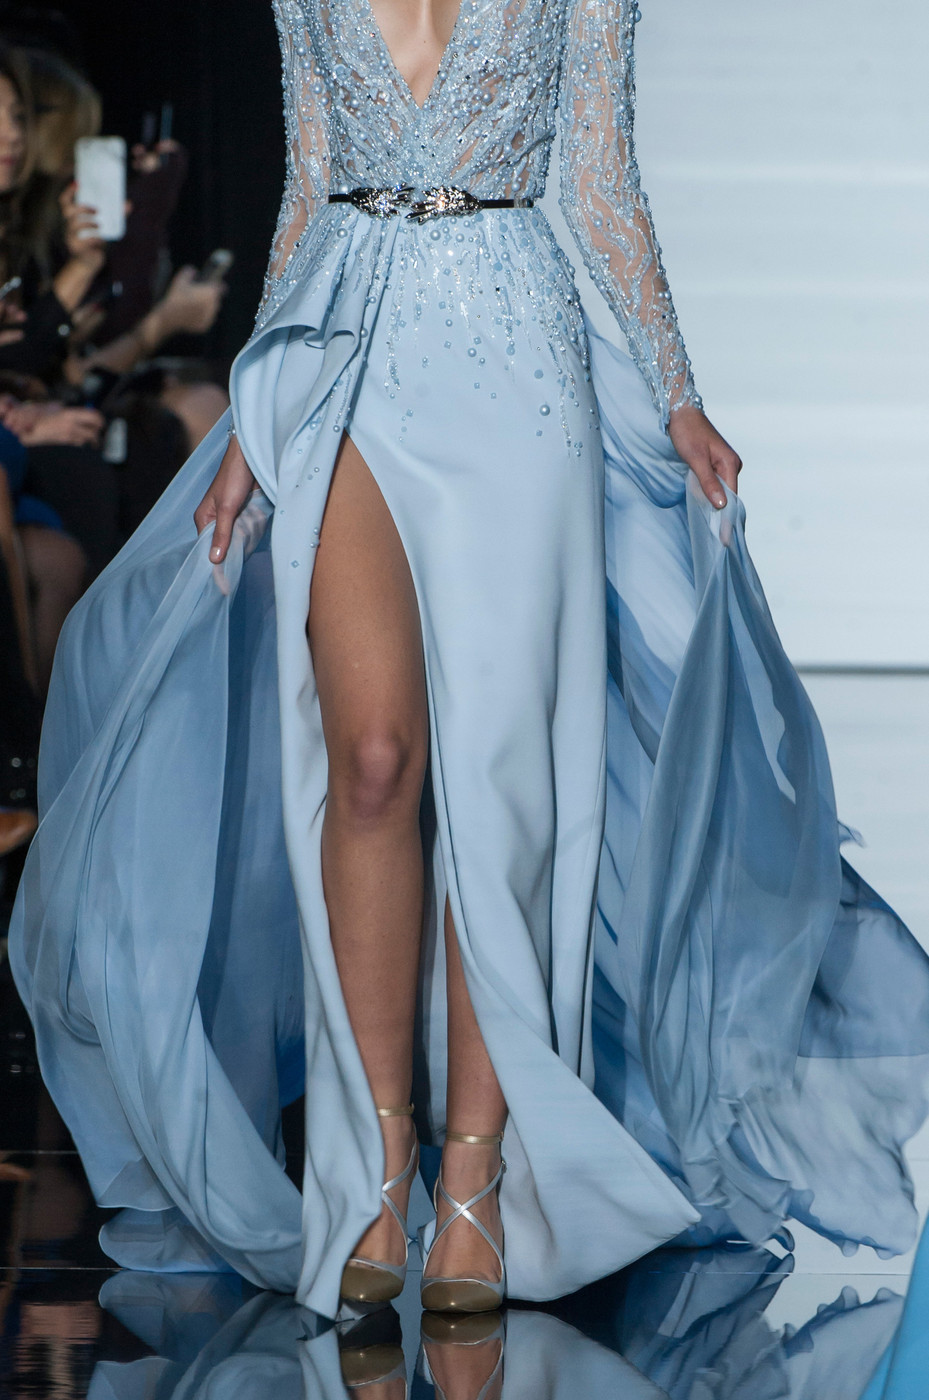 agameofclothes:  What Lysa Arryn would wear to flirt with her suitors, Zuhair Murad